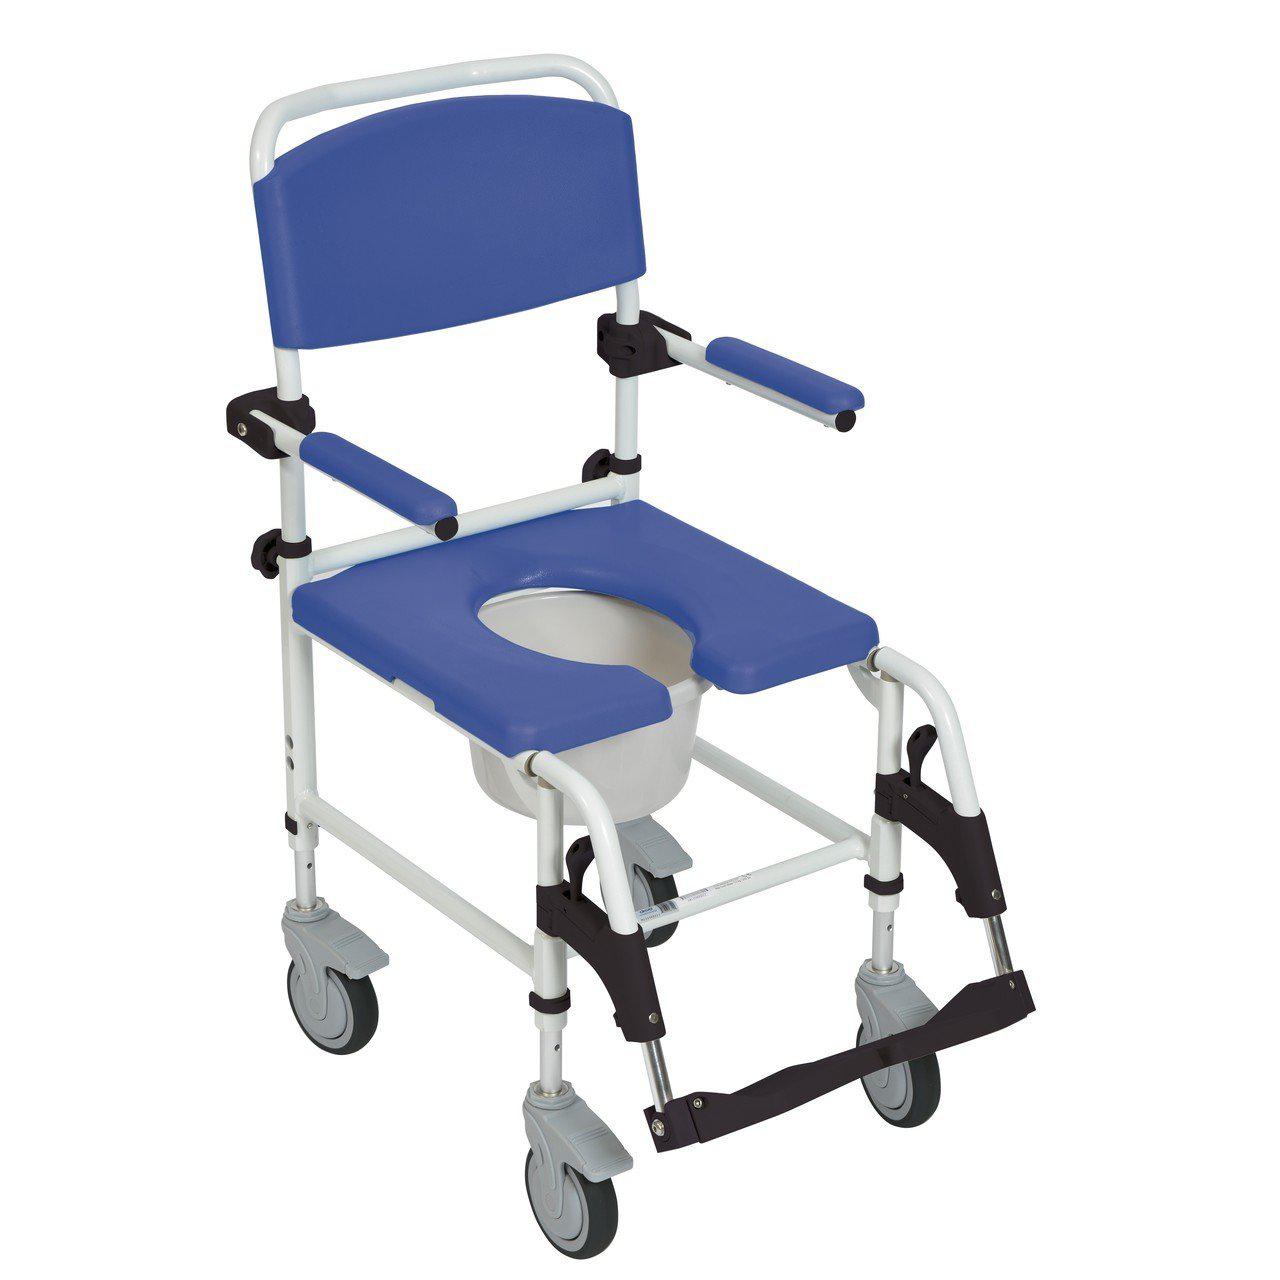 Drive Aluminum Rehab Shower Commode Chair with Four Rear-locking Casters